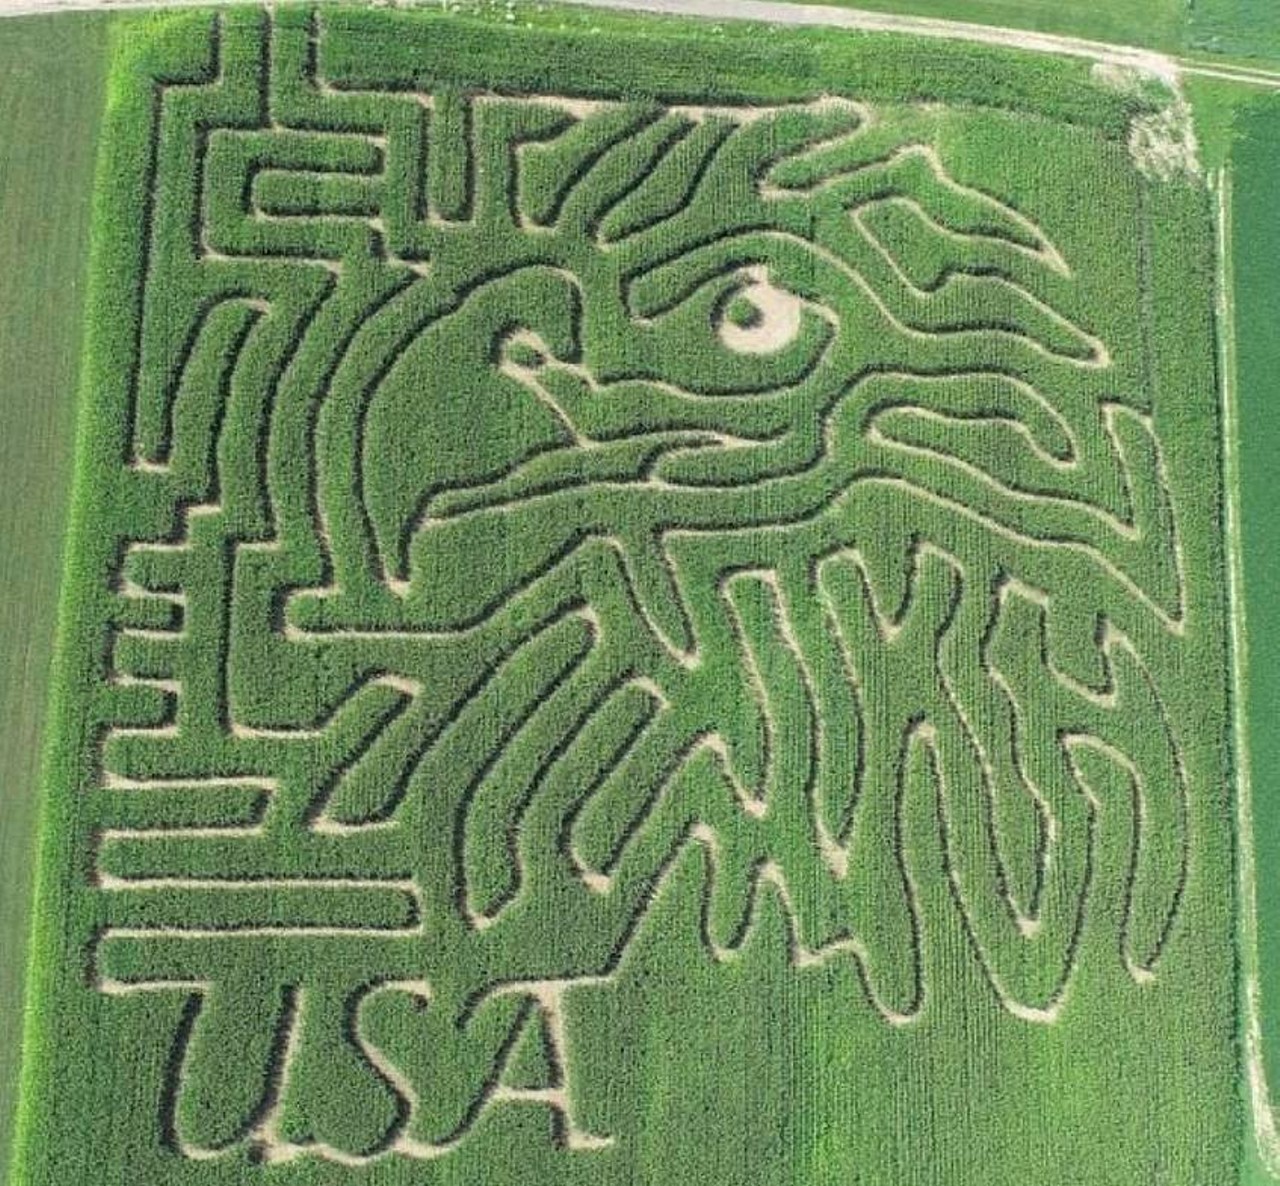 Hit Up A Corn Maze
Corn mazes, yes corn mazes are big things. I mean, we live in Ohio, what else do you expect?